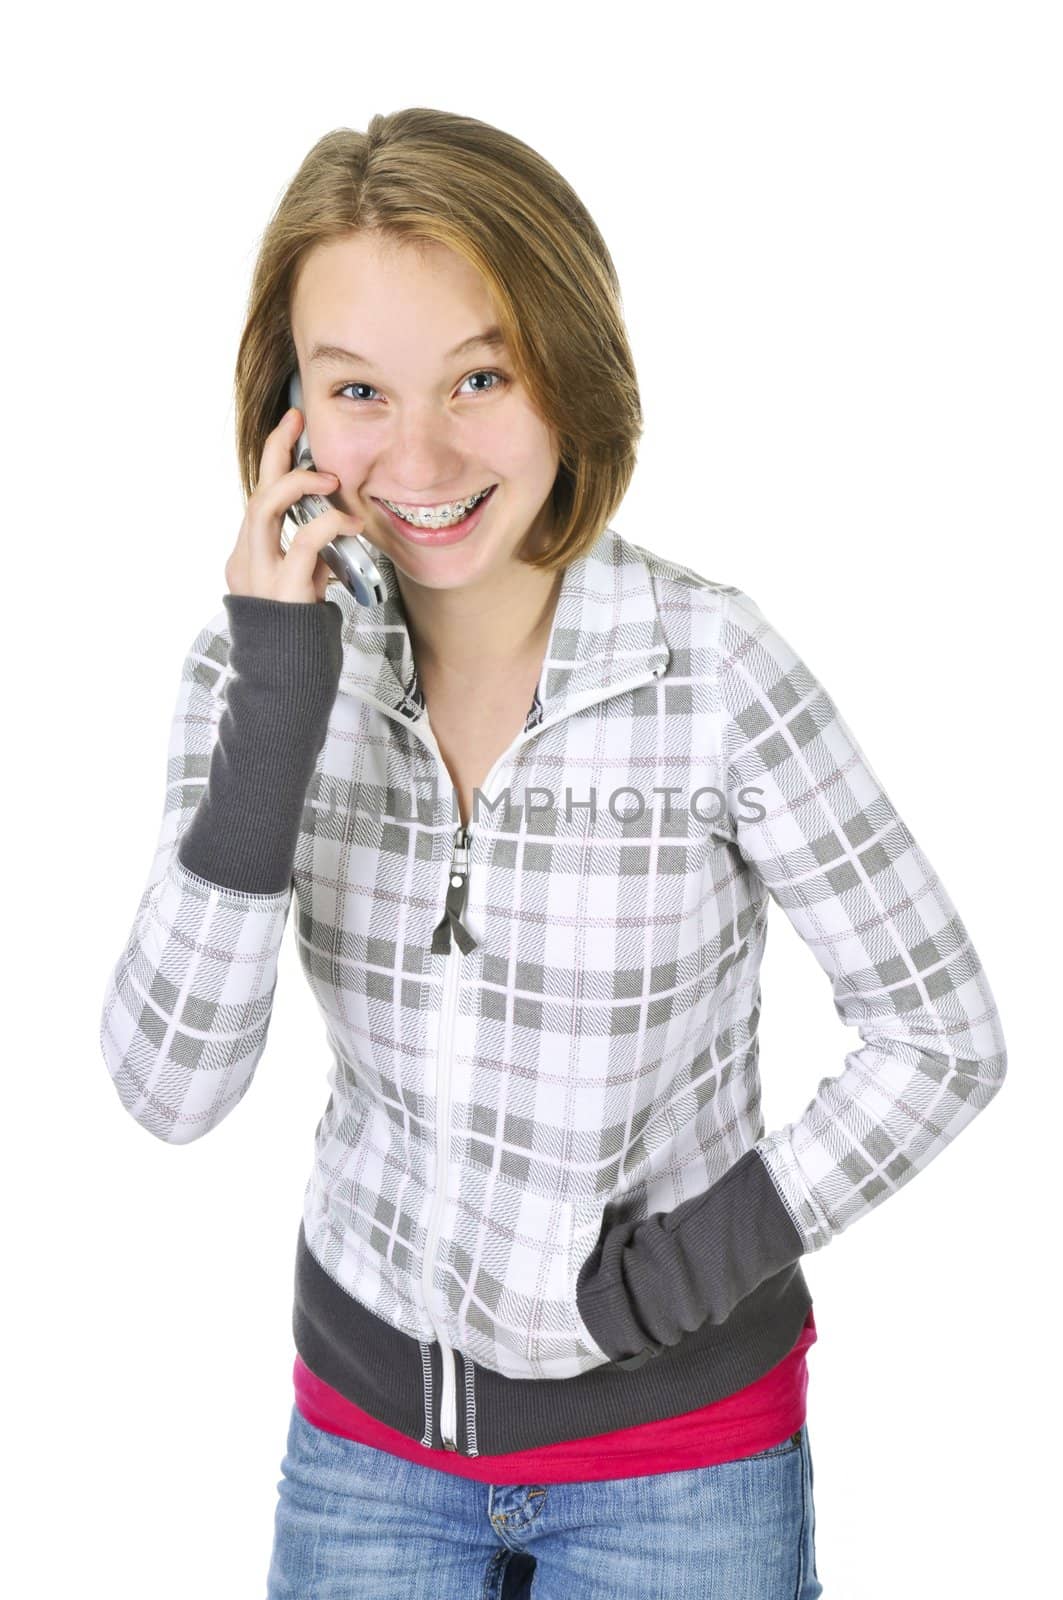 Teenage girl talking on a cell phone isolated on white background